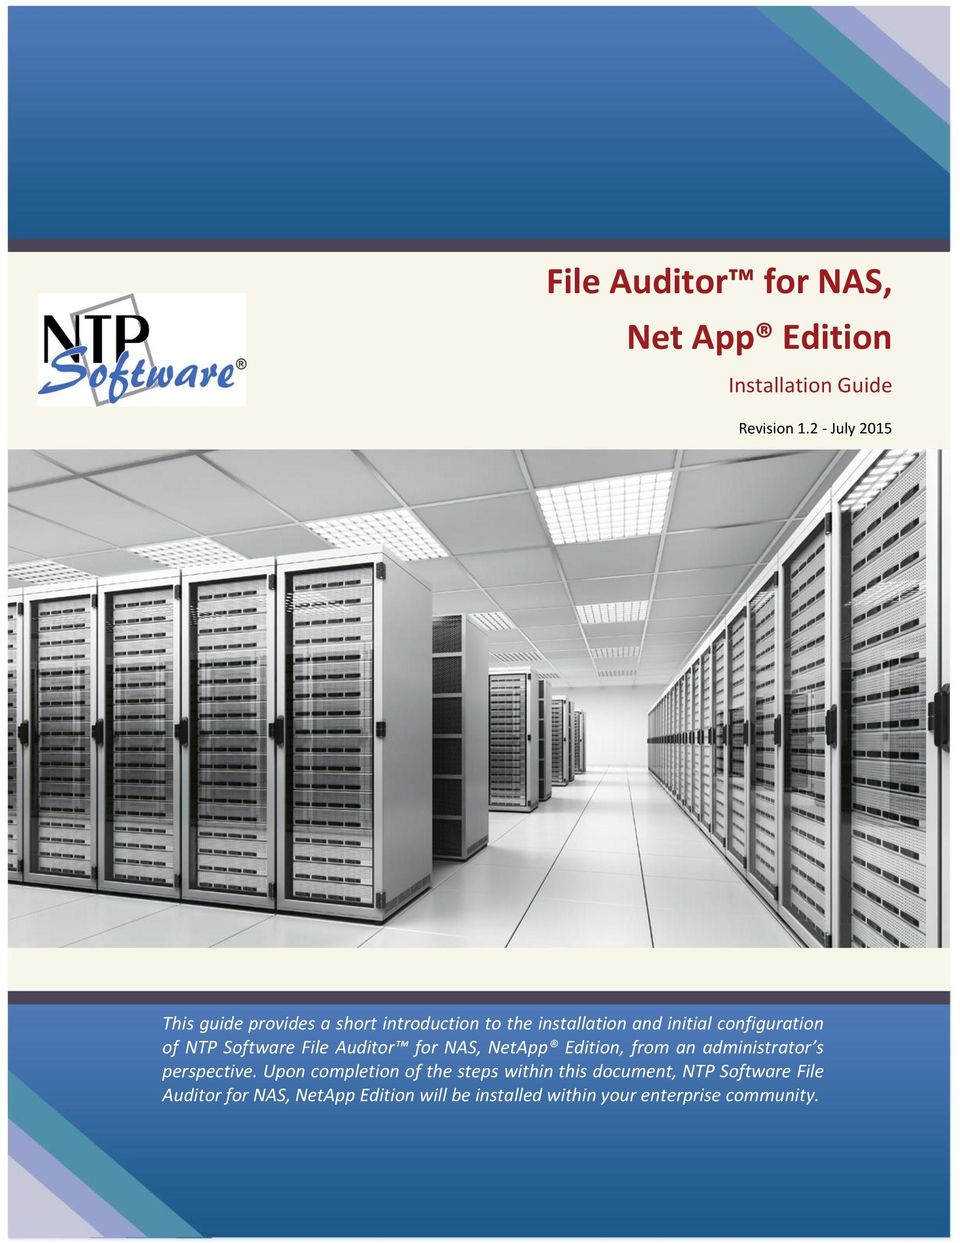 Software File Auditor for NAS, NetApp Edition, from an administrator s perspective.